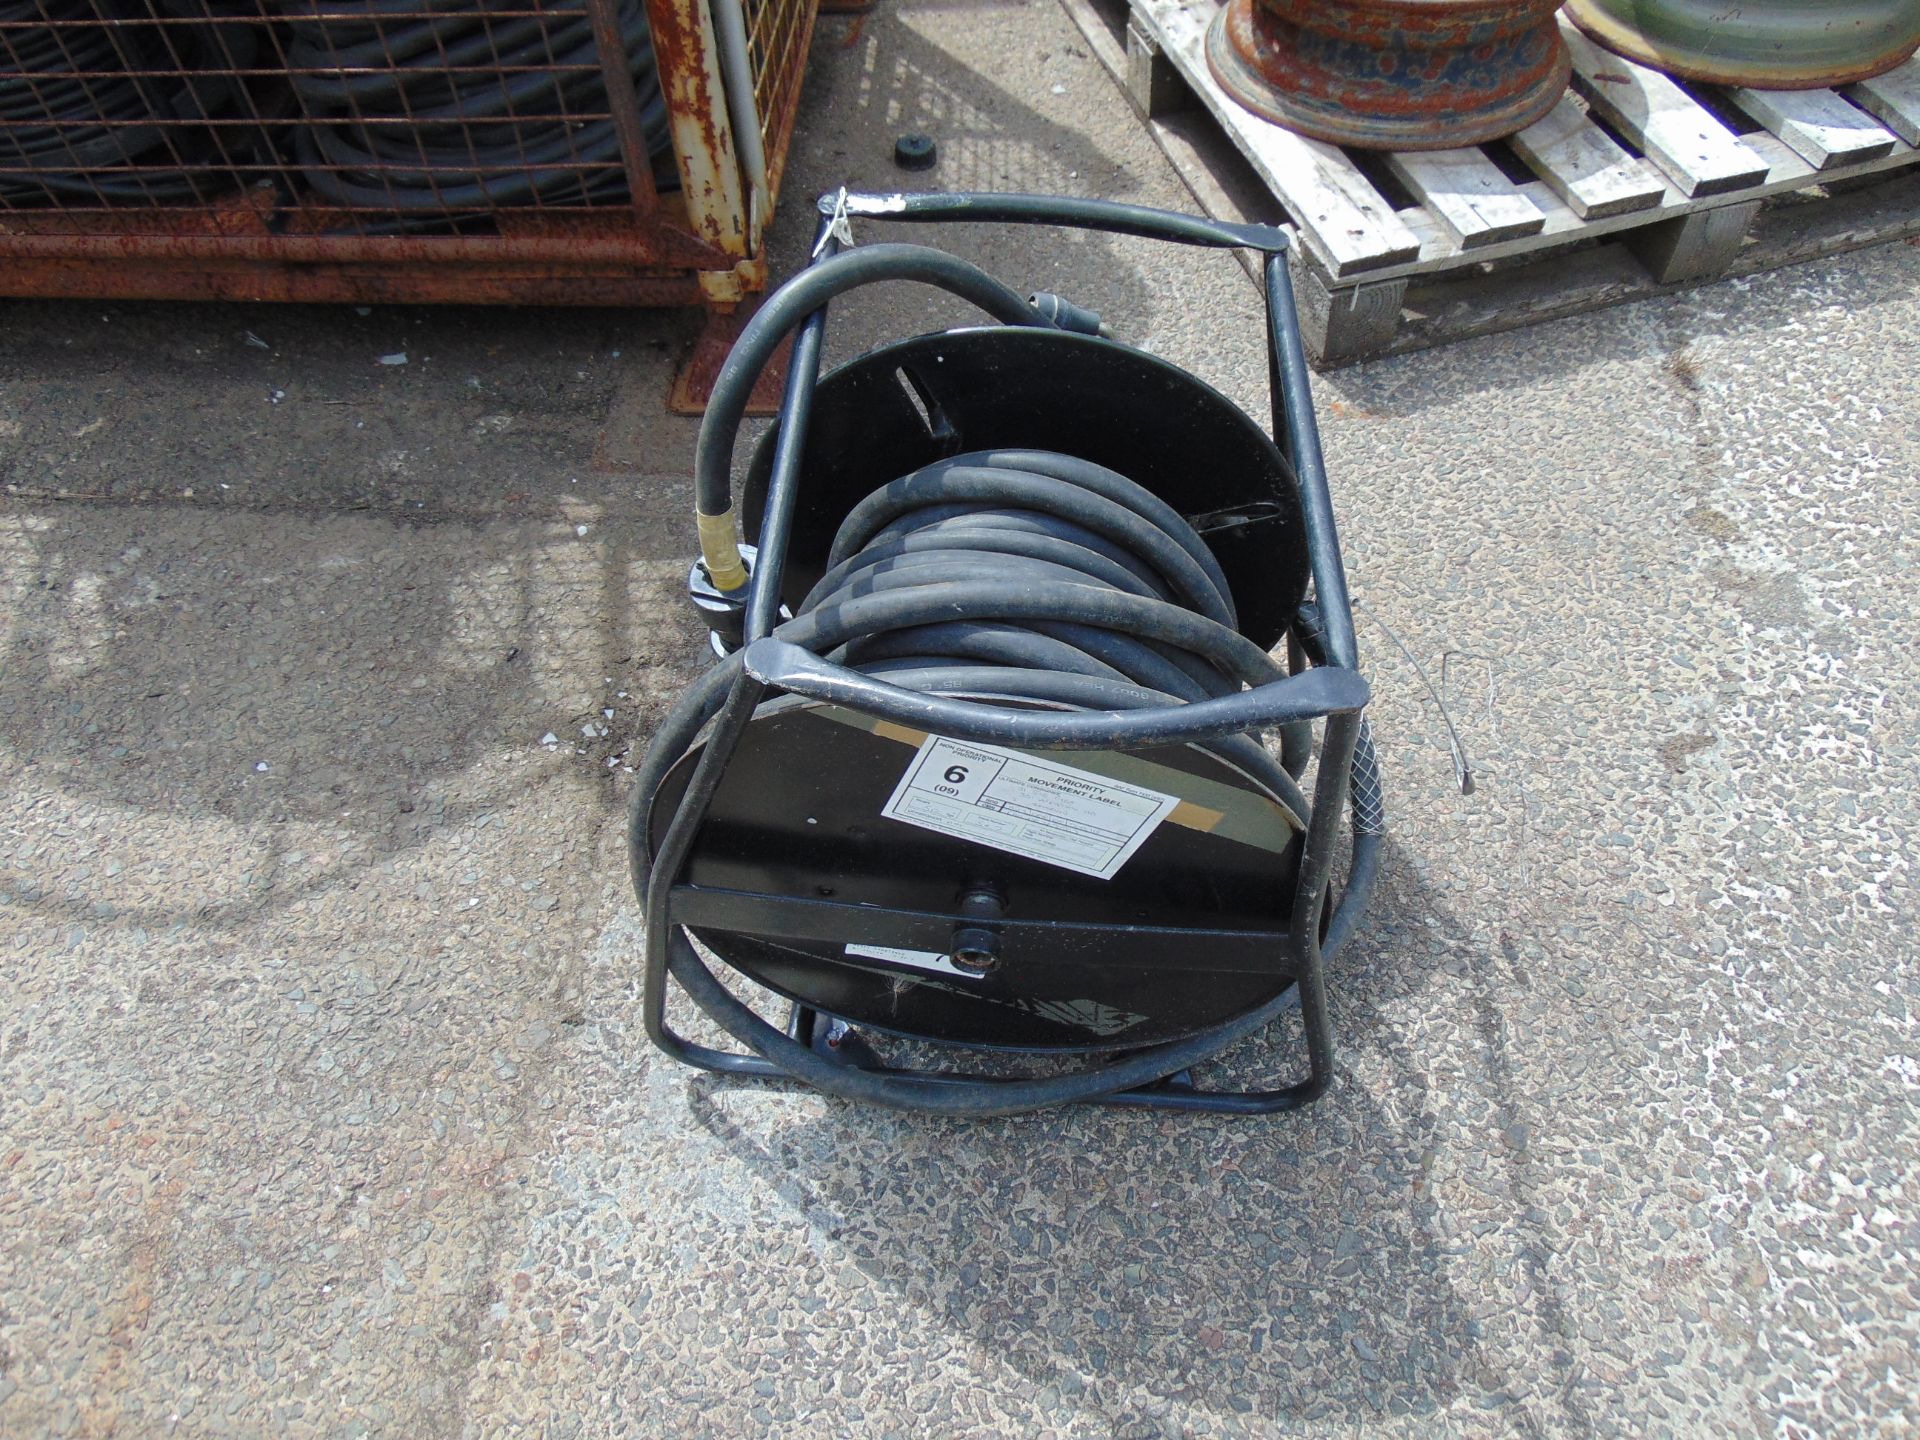 1 Large Cable Reel of HD 3 Phase Power Cable c/w Generator Plugs - Image 2 of 4